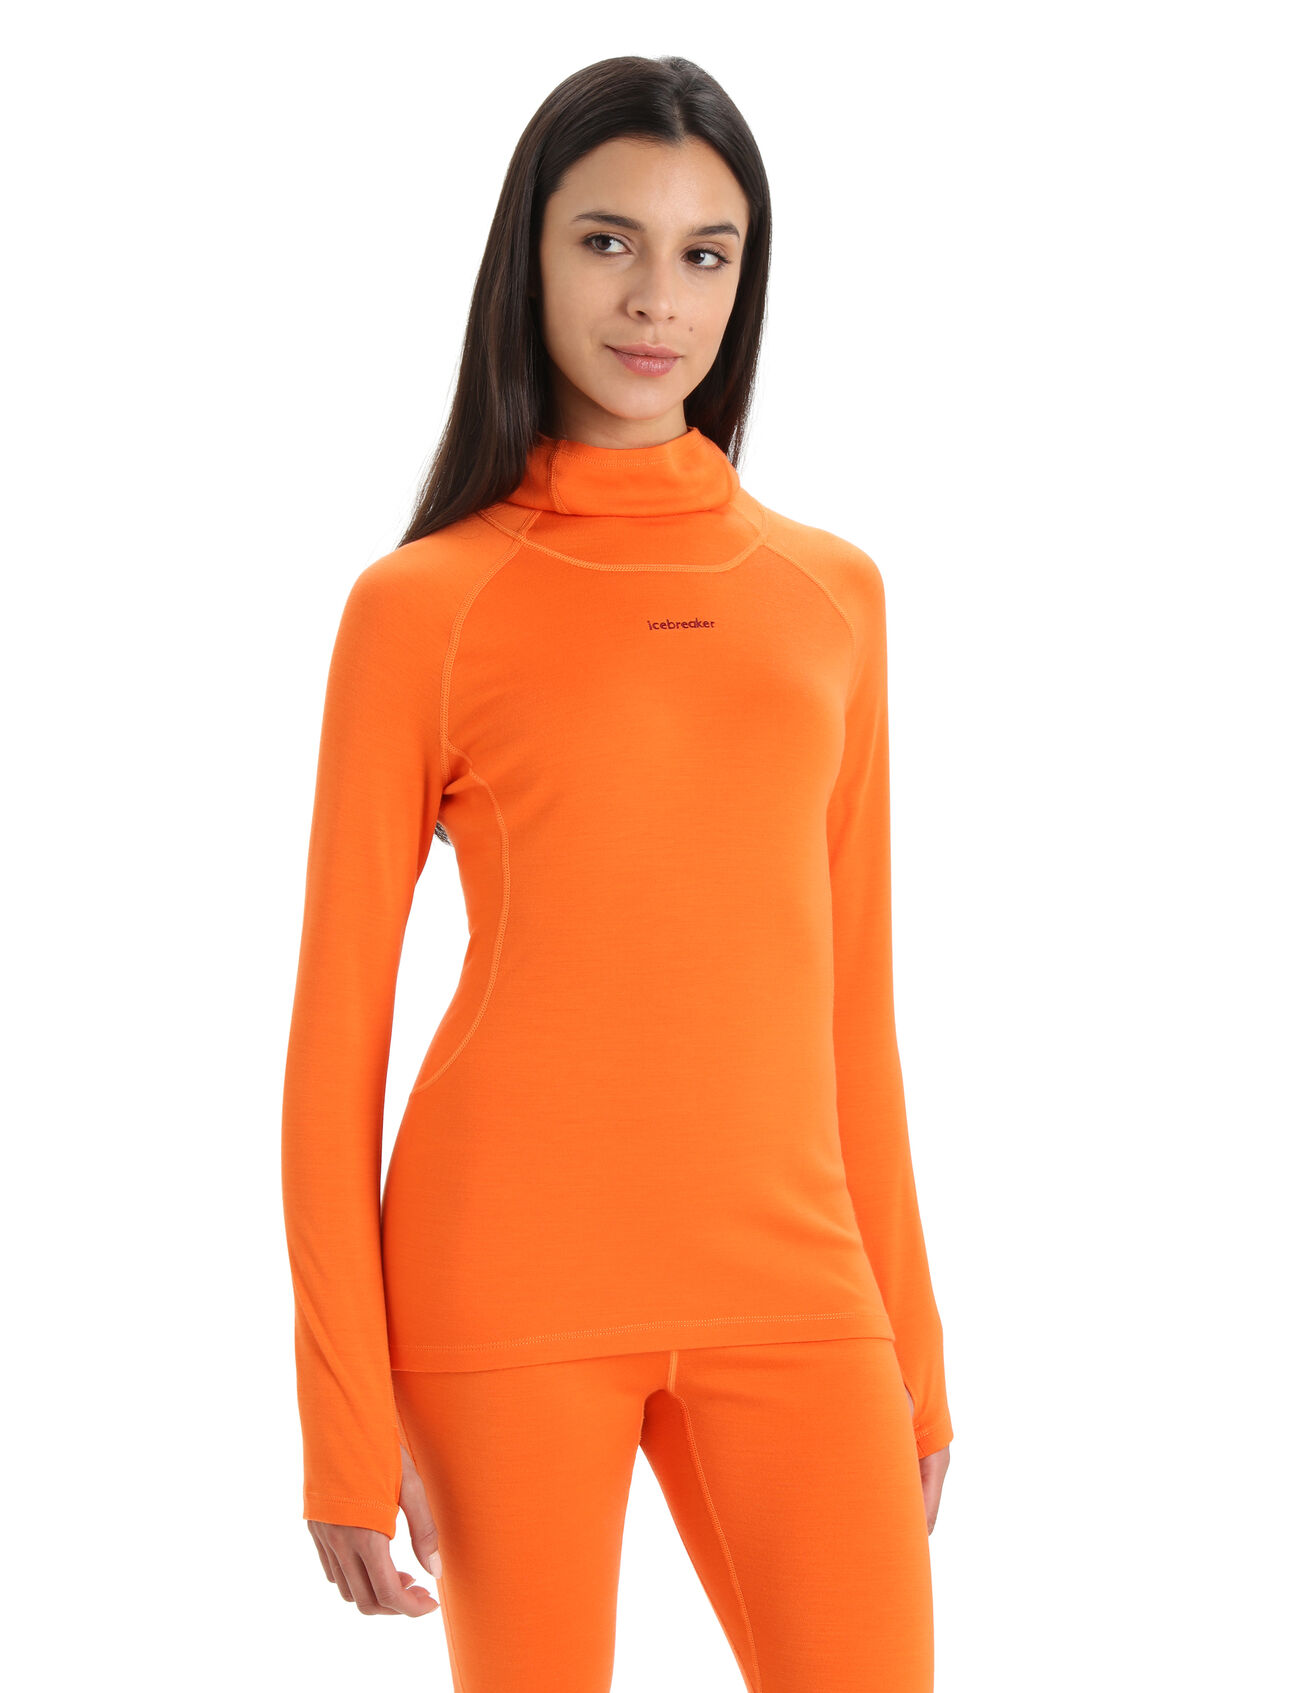 Womens MerinoFine™ Long Sleeve Roll Neck Thermal Top A premium, slim-fit base layer made with luxuriously soft 15.5 micron merino wool fibers and a high-neck design for added protection, the MerinoFine™ Long Sleeve Roll Neck is at the intersection of comfort and performance.